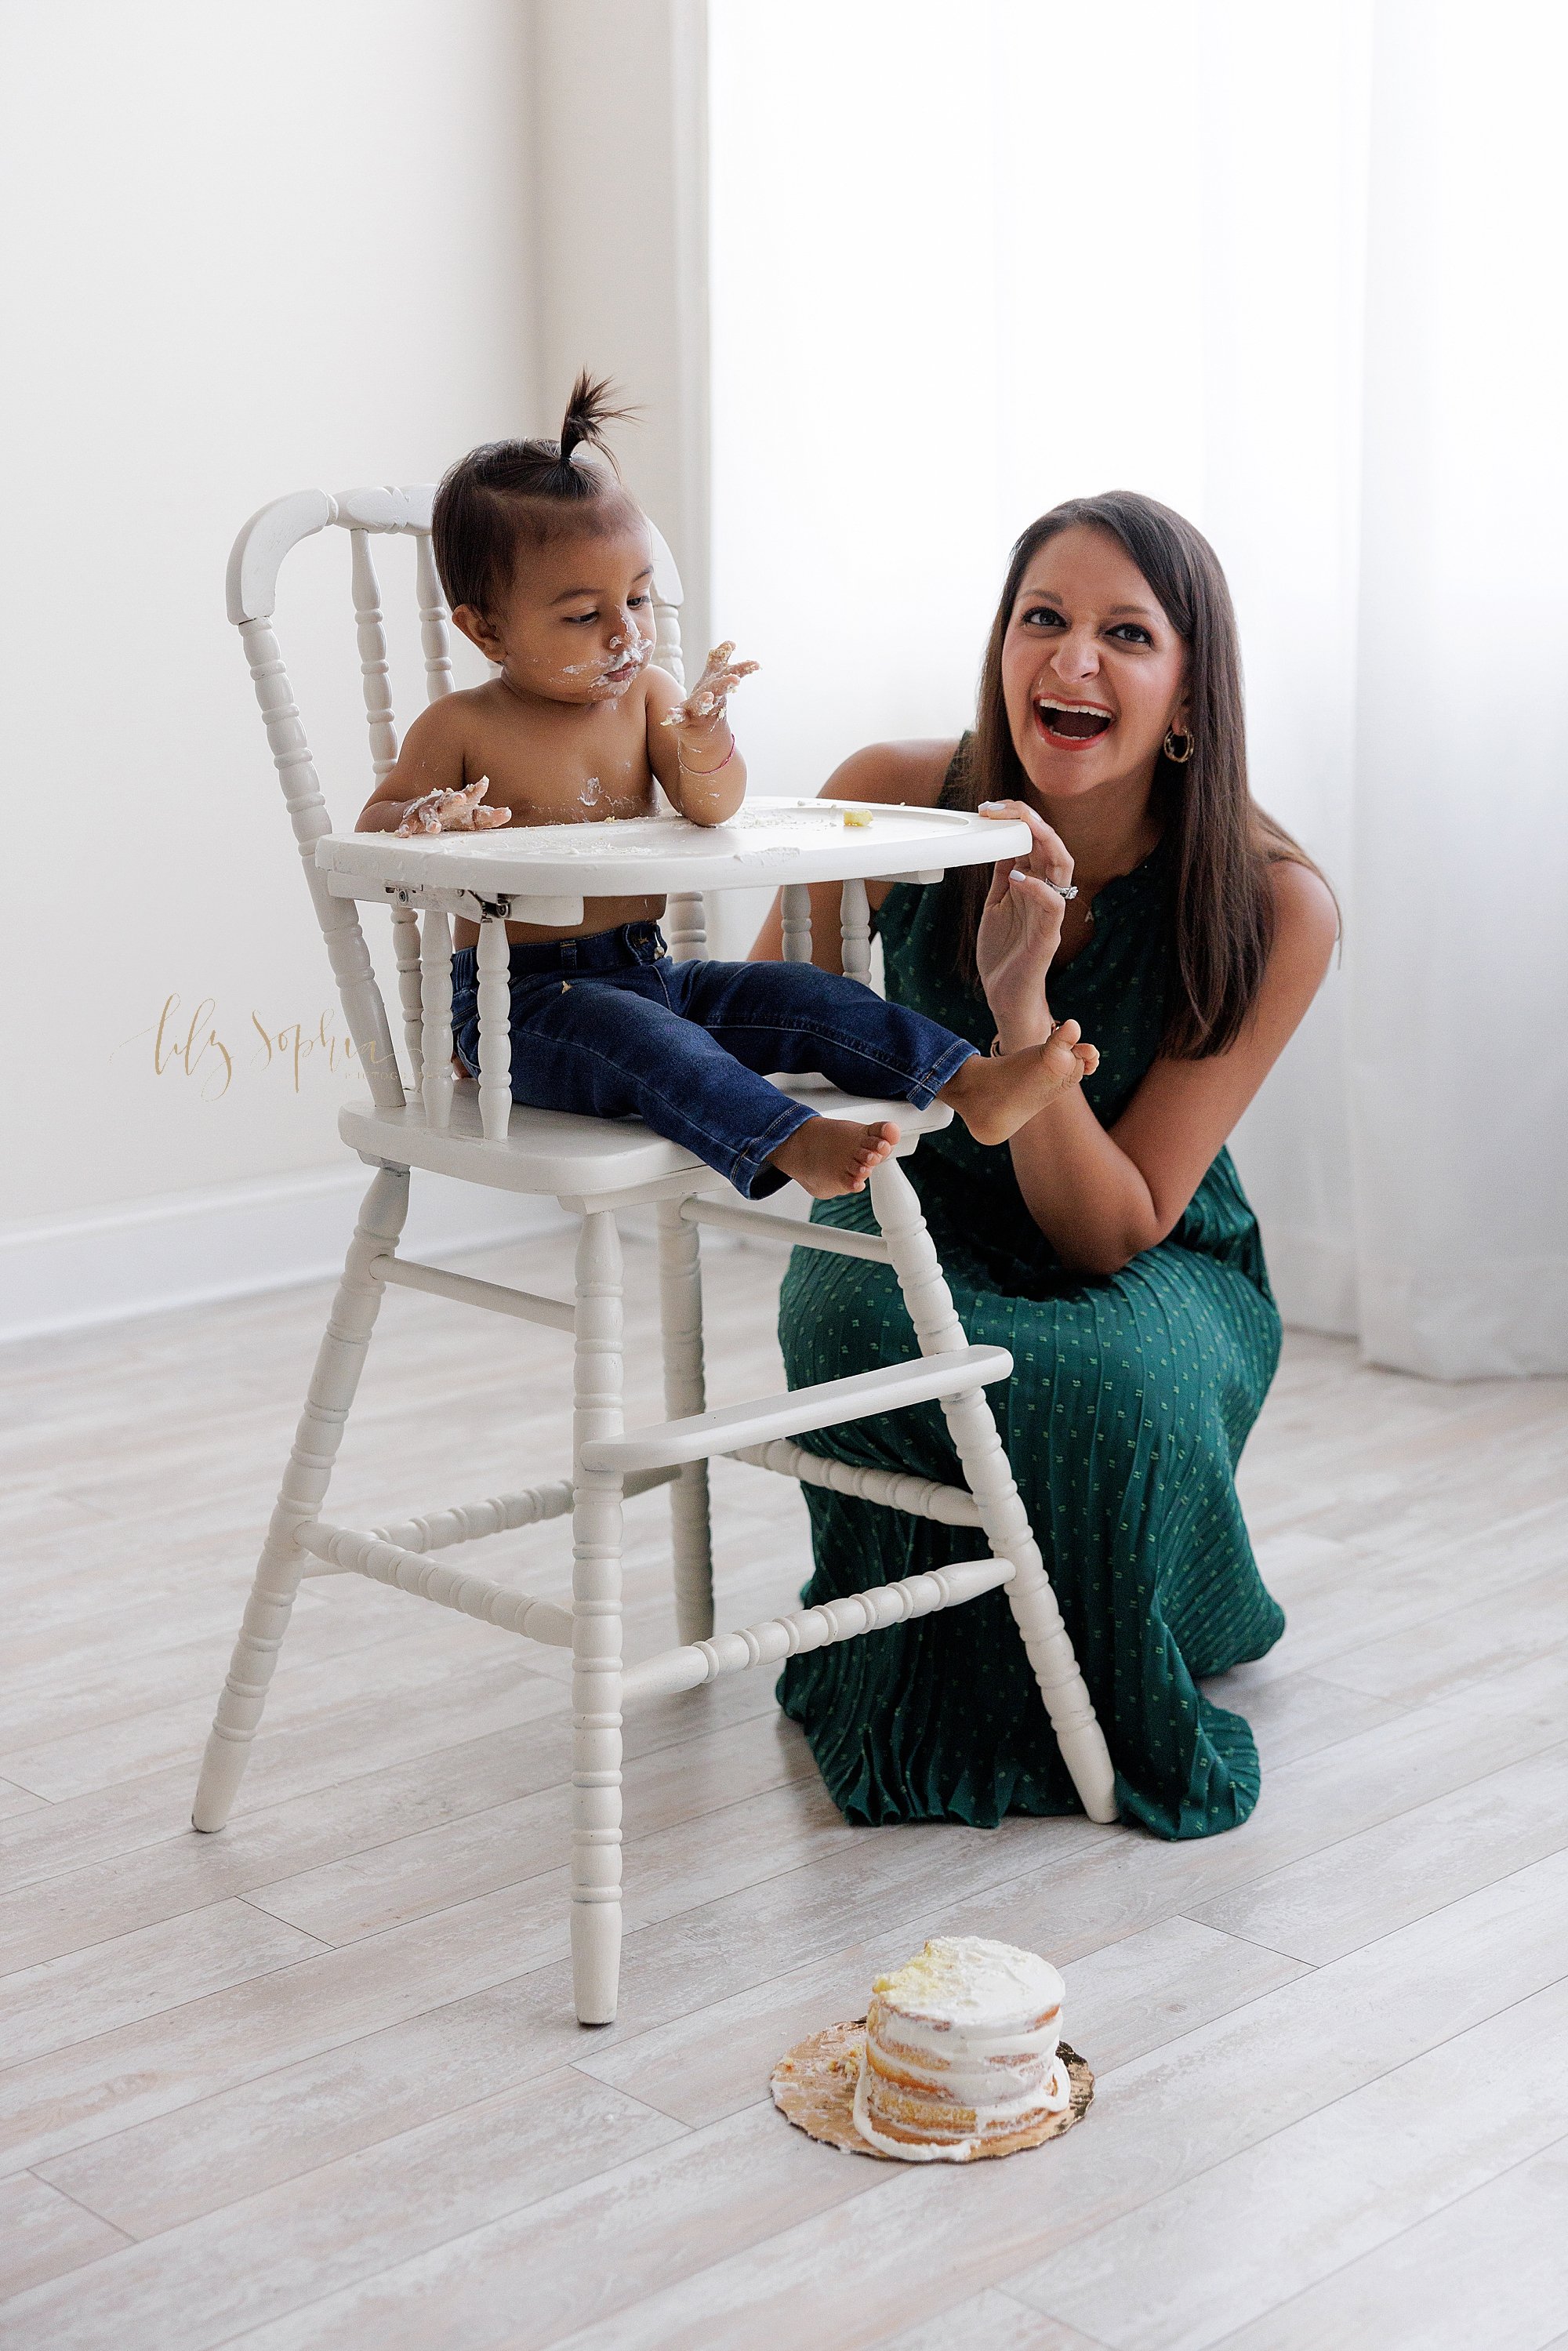  A one-year old little boy sits in an antique highchair covered in icing that is left from his smash cake for his first birthday as his mom squats next to him and laughs taken in front of a window streaming natural light in a photography studio near 